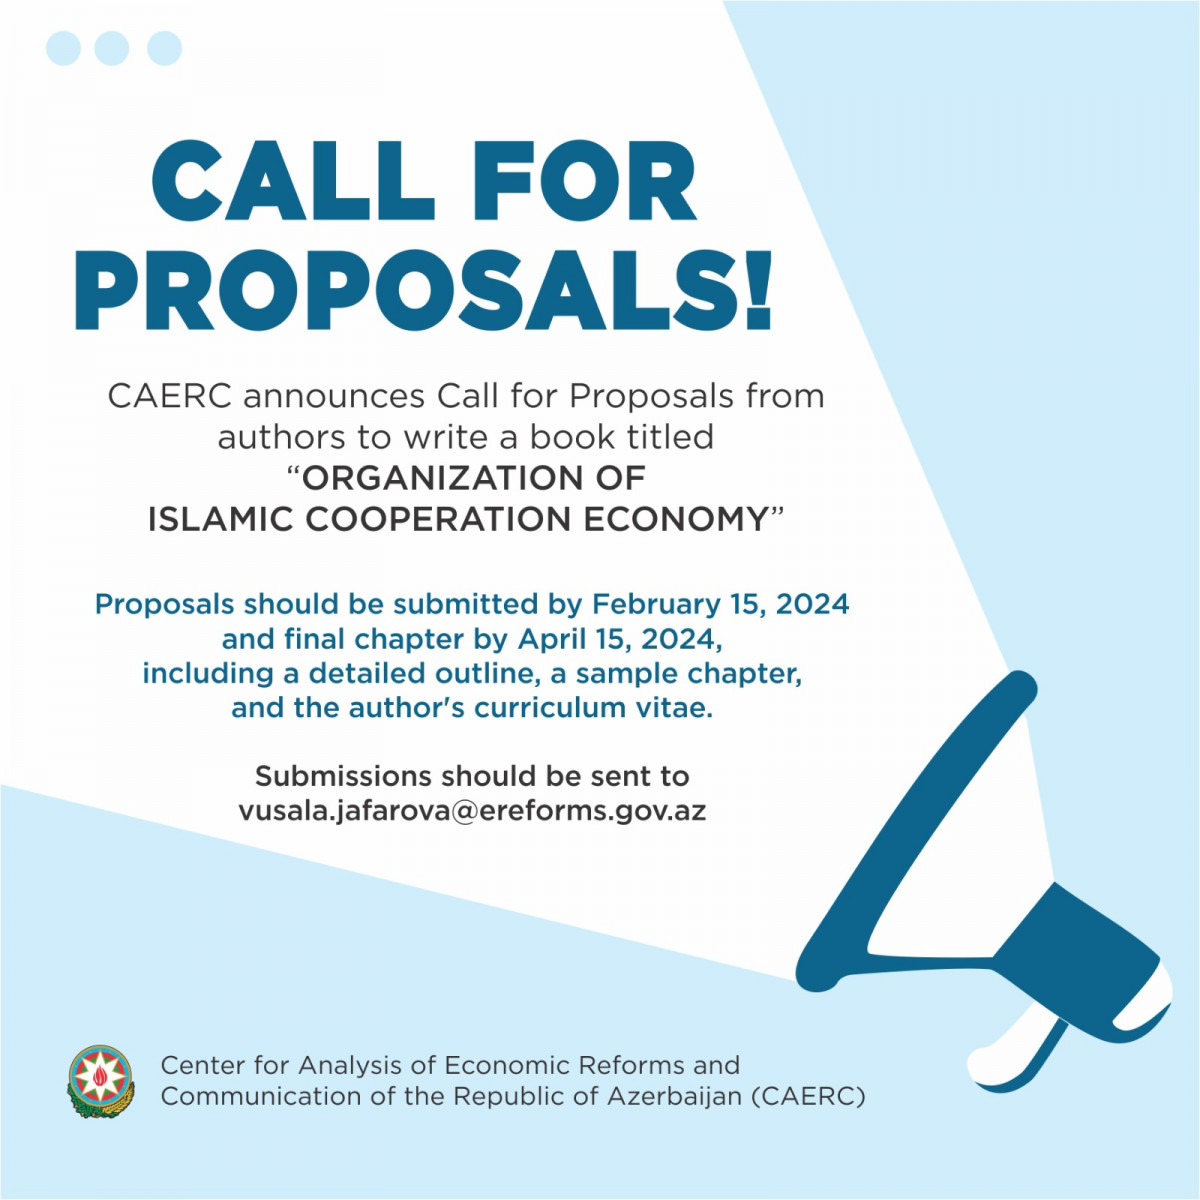 CAERC announces Call for Proposals from authors to write a book titled “Organization of Islamic Cooperation Economy”